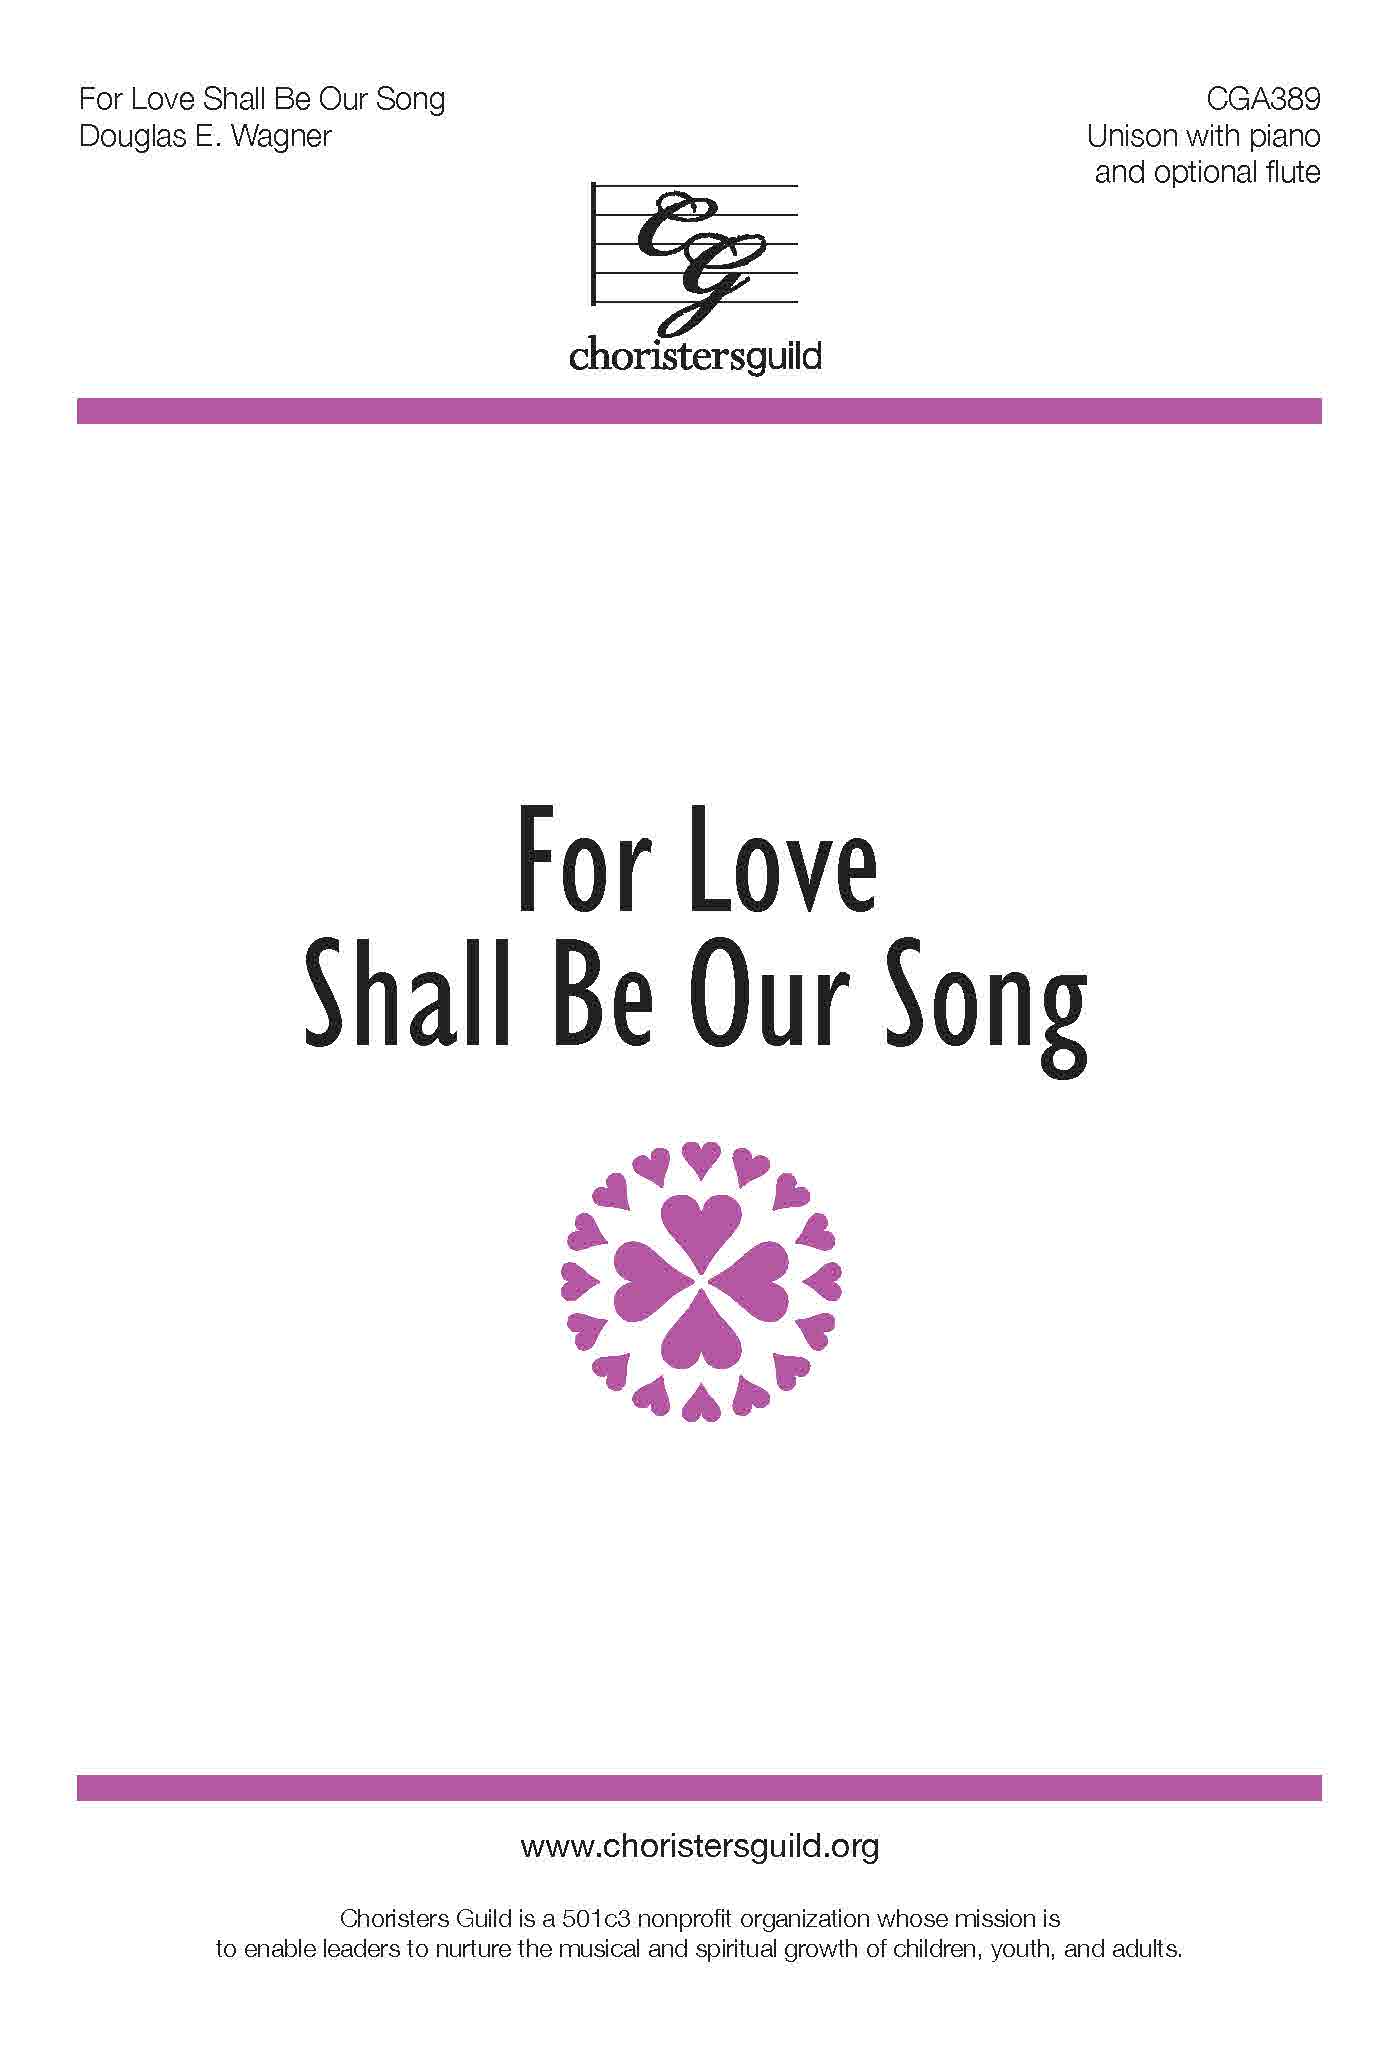 For Love Shall Be Our Song